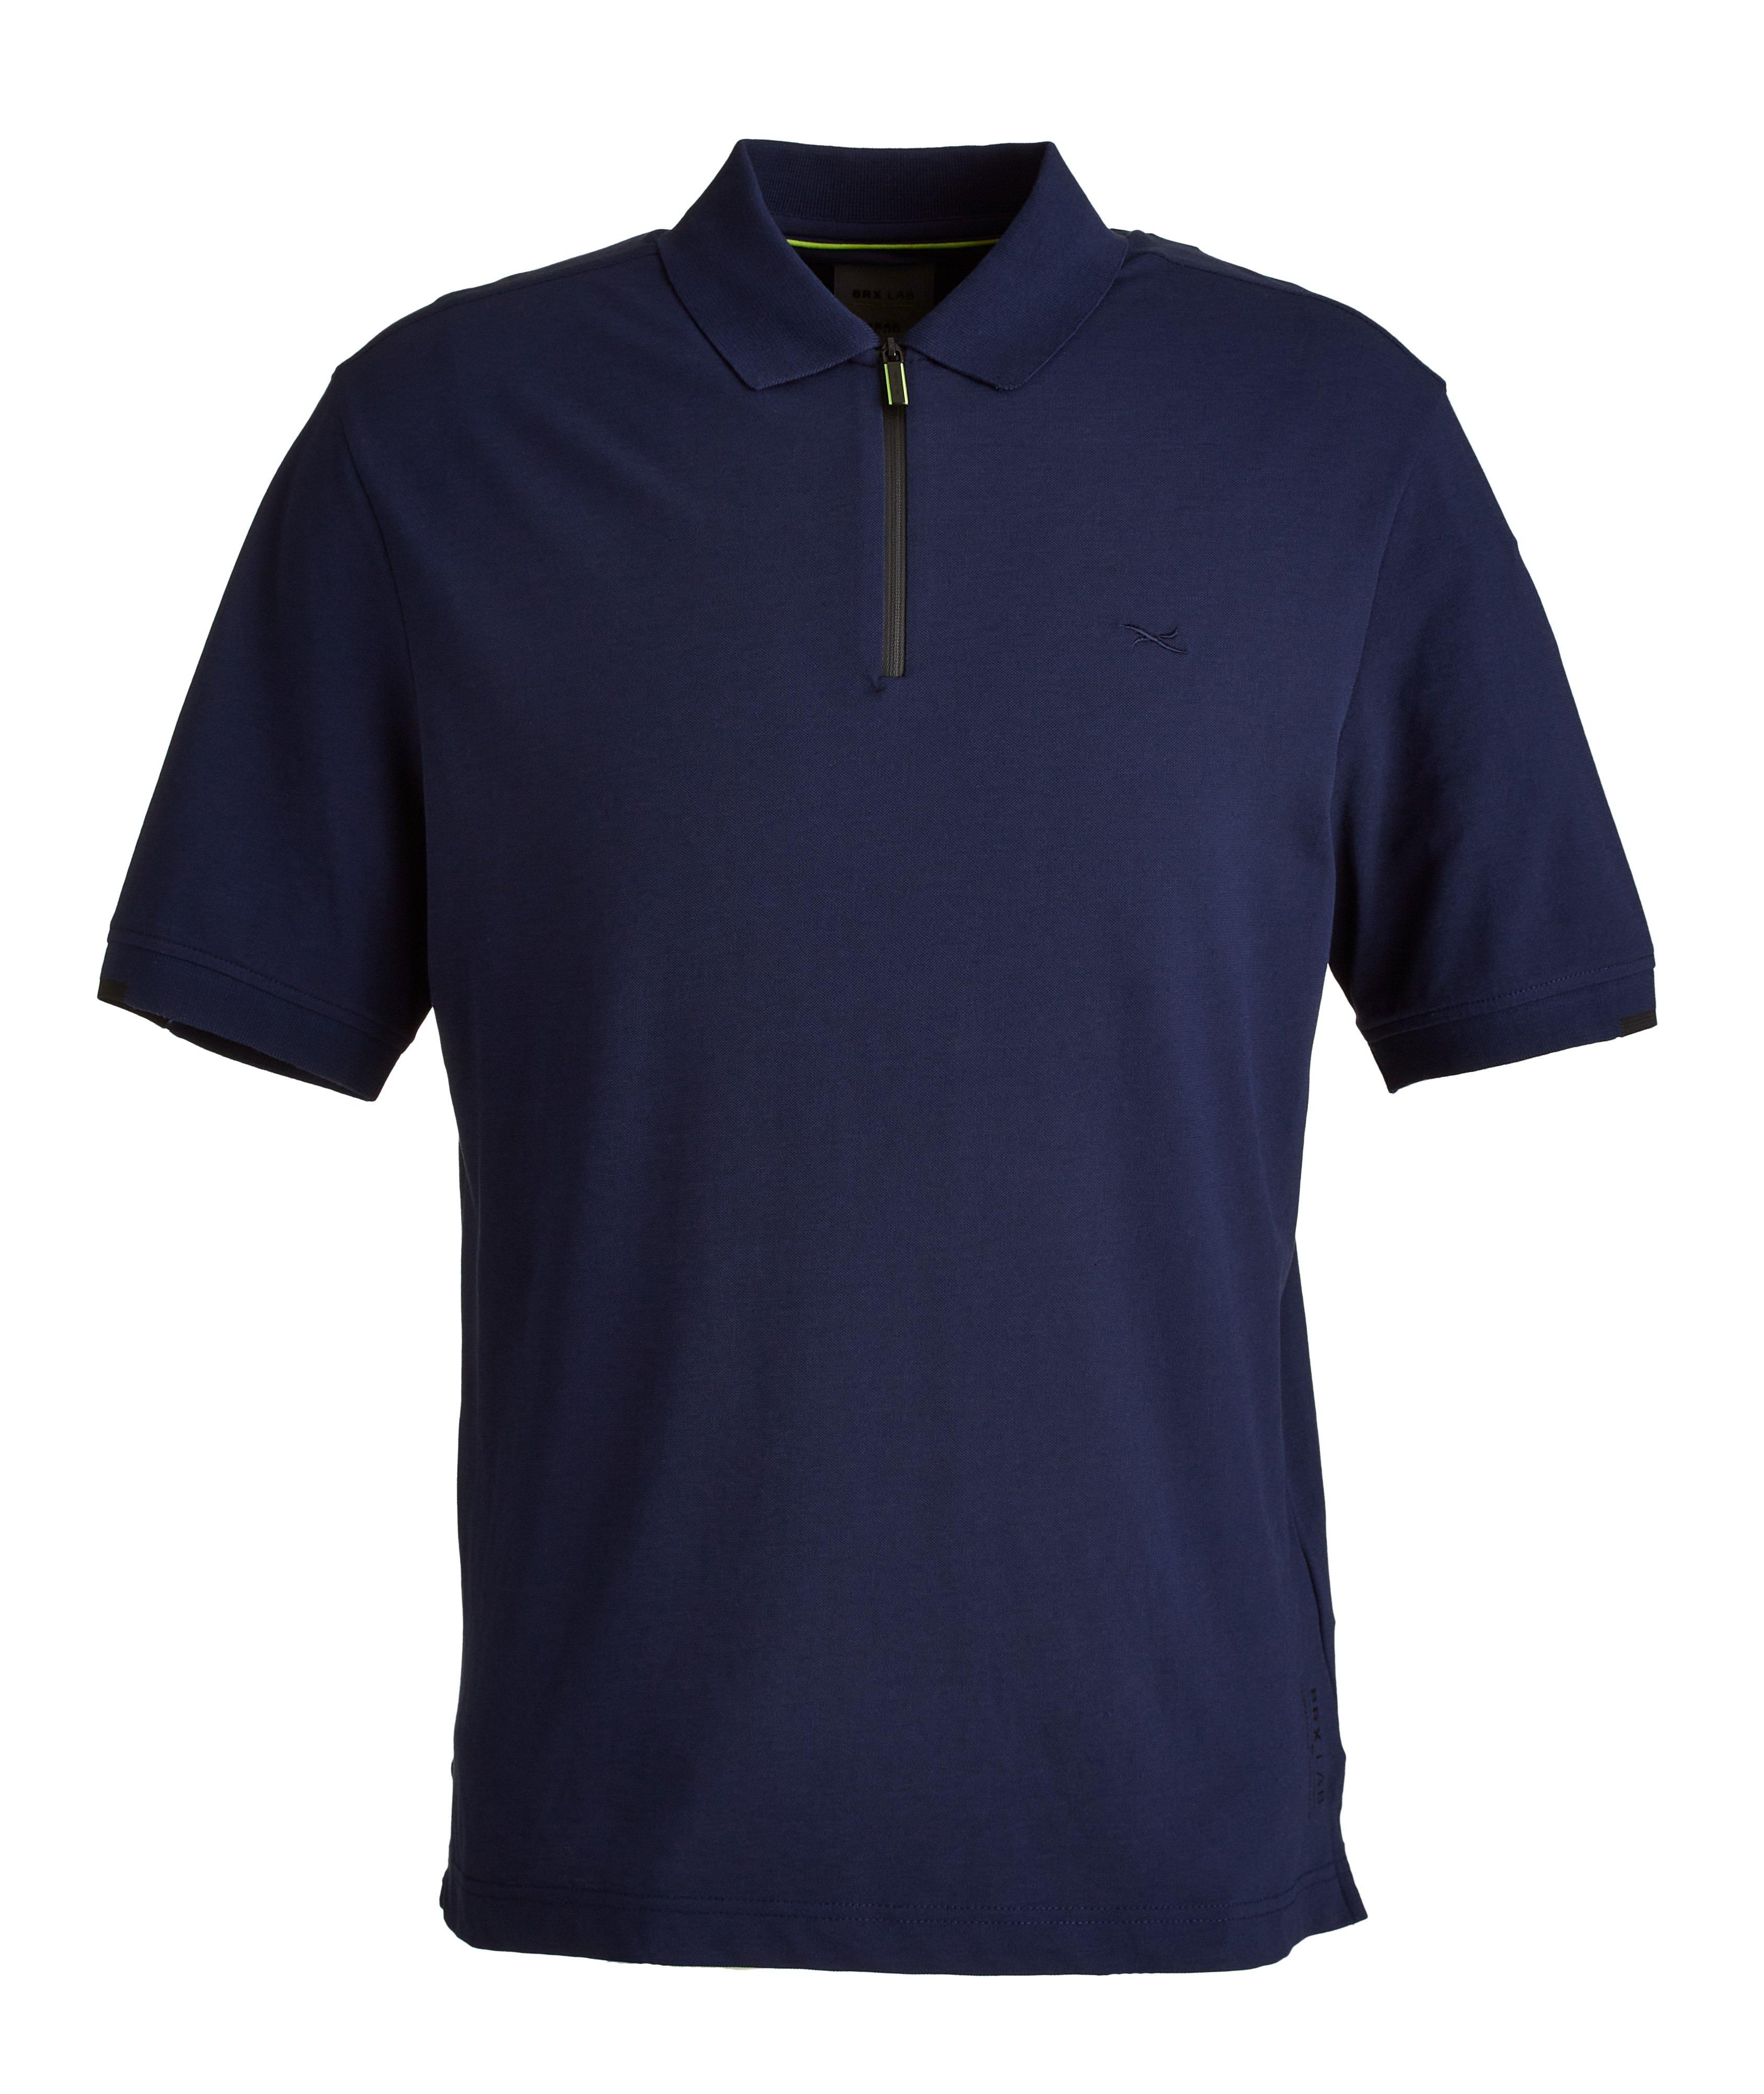 BRX LAB Percy Stretch Cotton-Blend Polo image 0